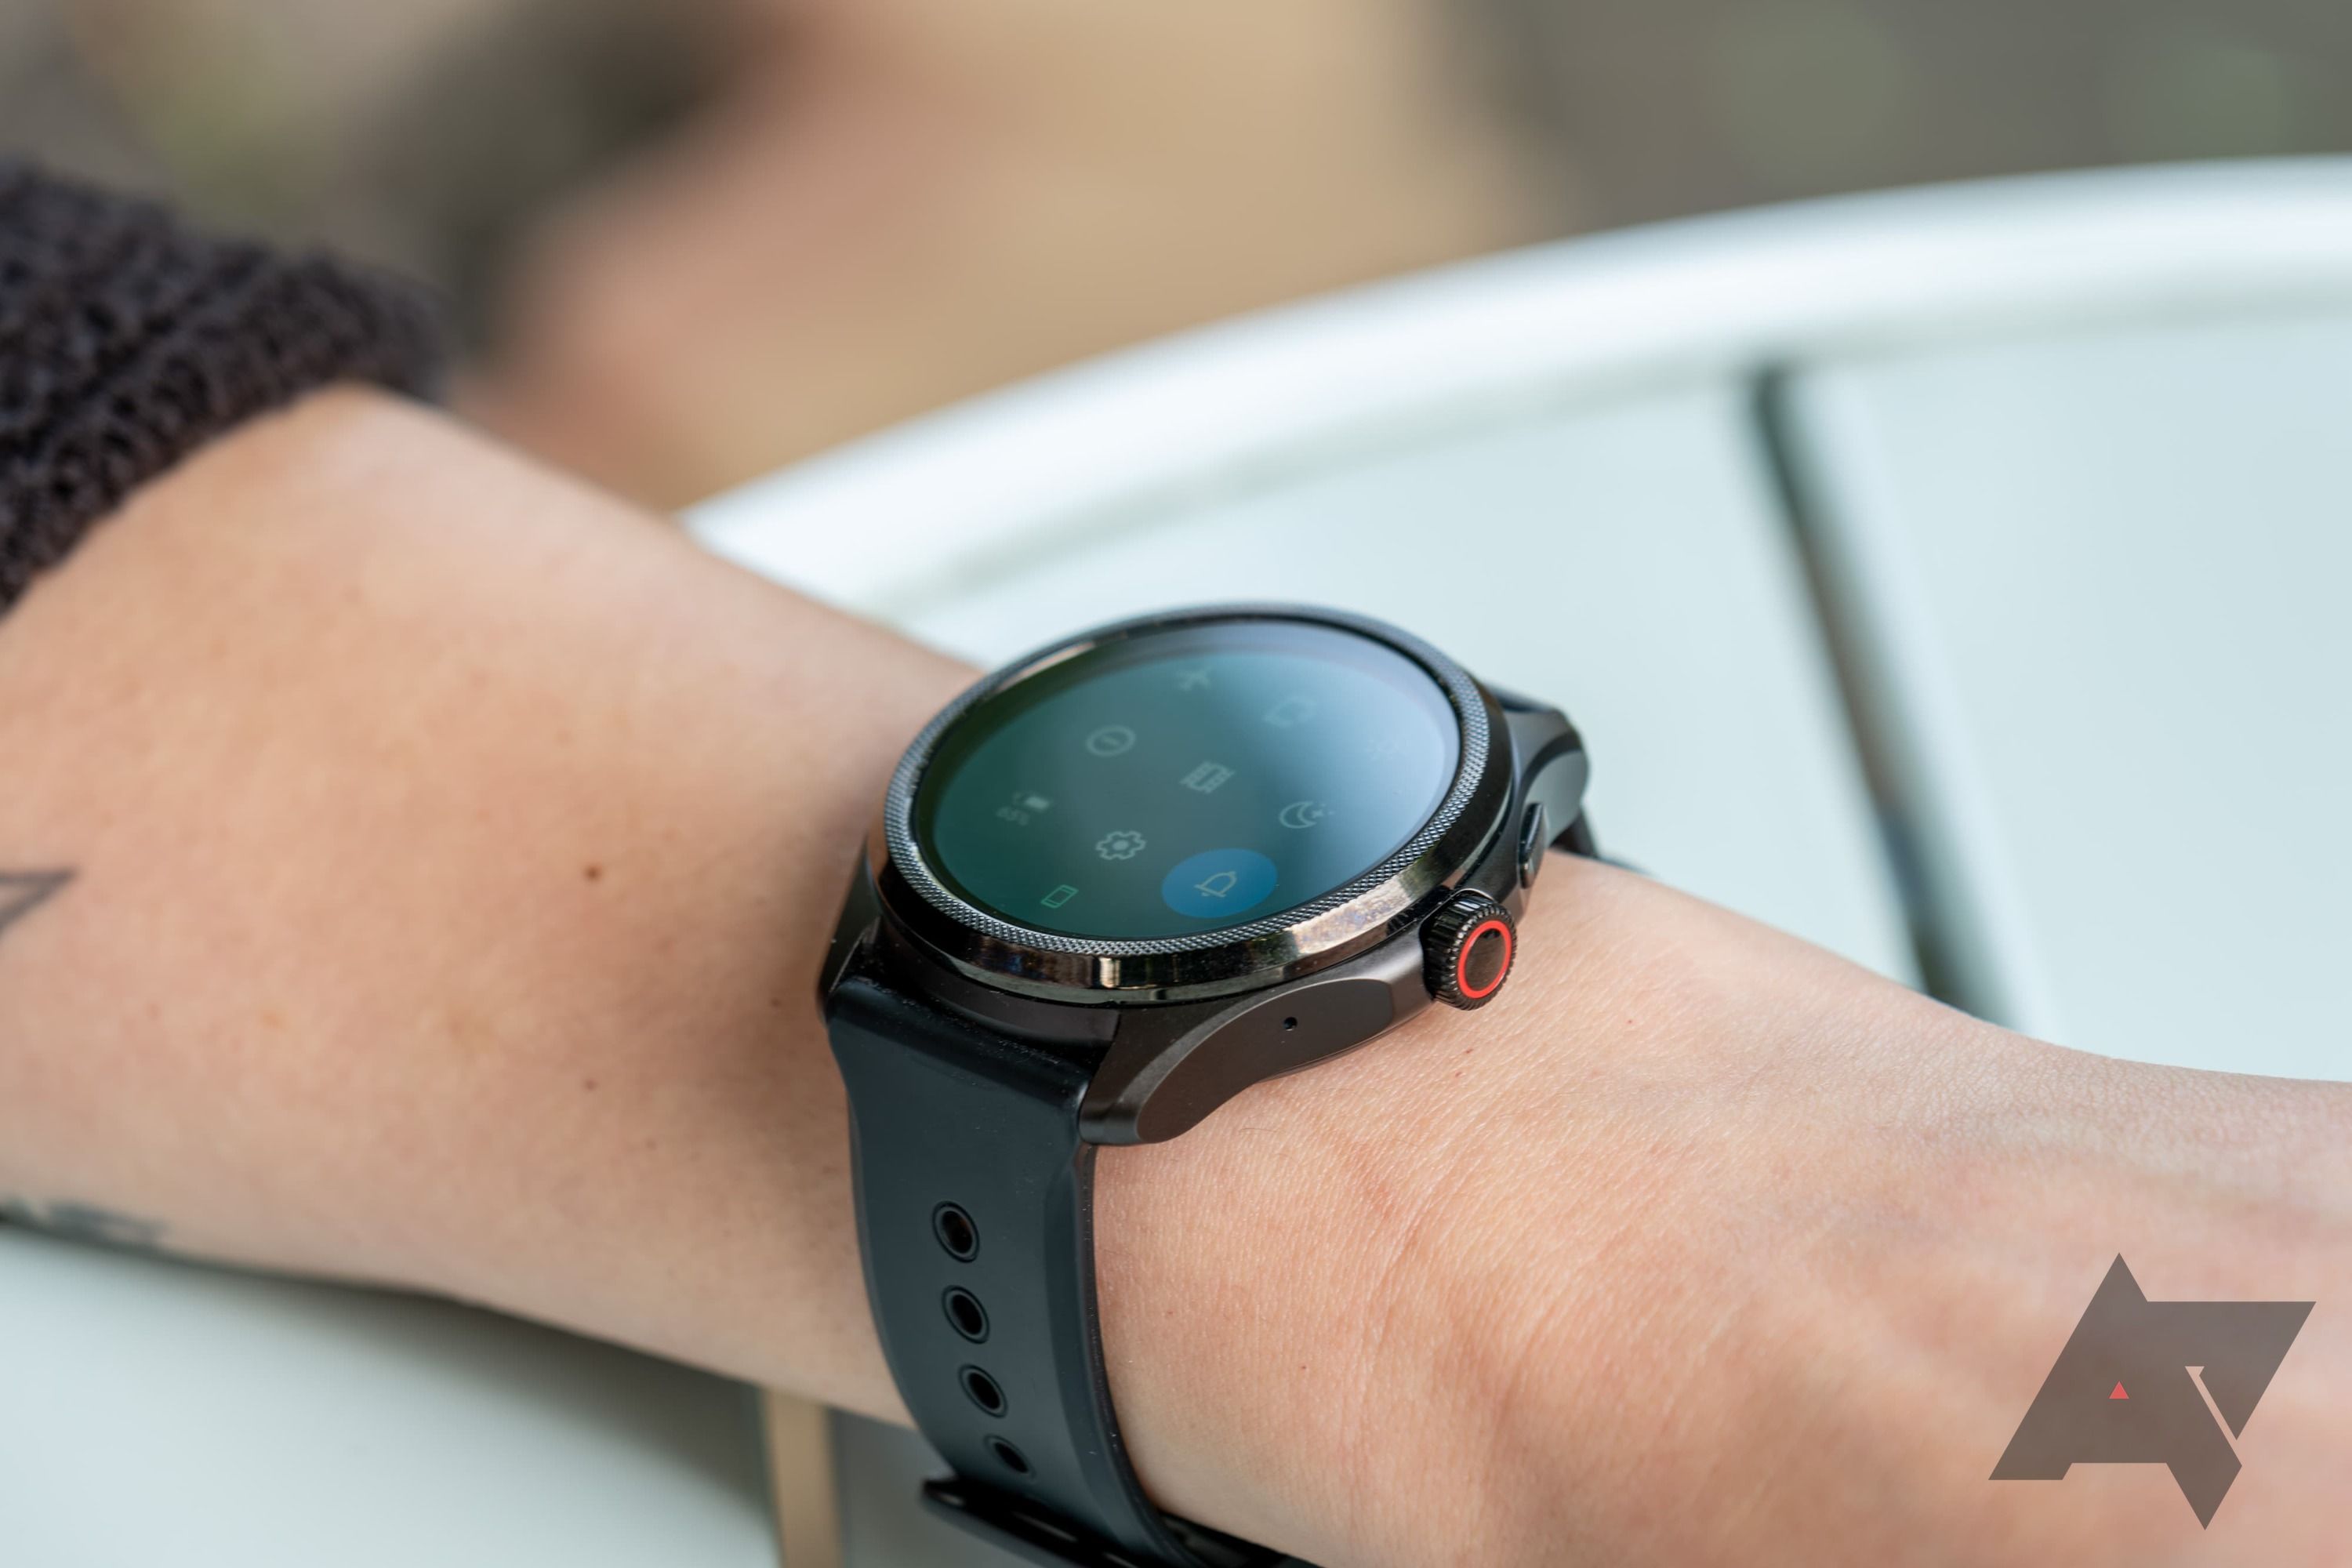 State of Google Wear OS 4: List of compatible smartwatches